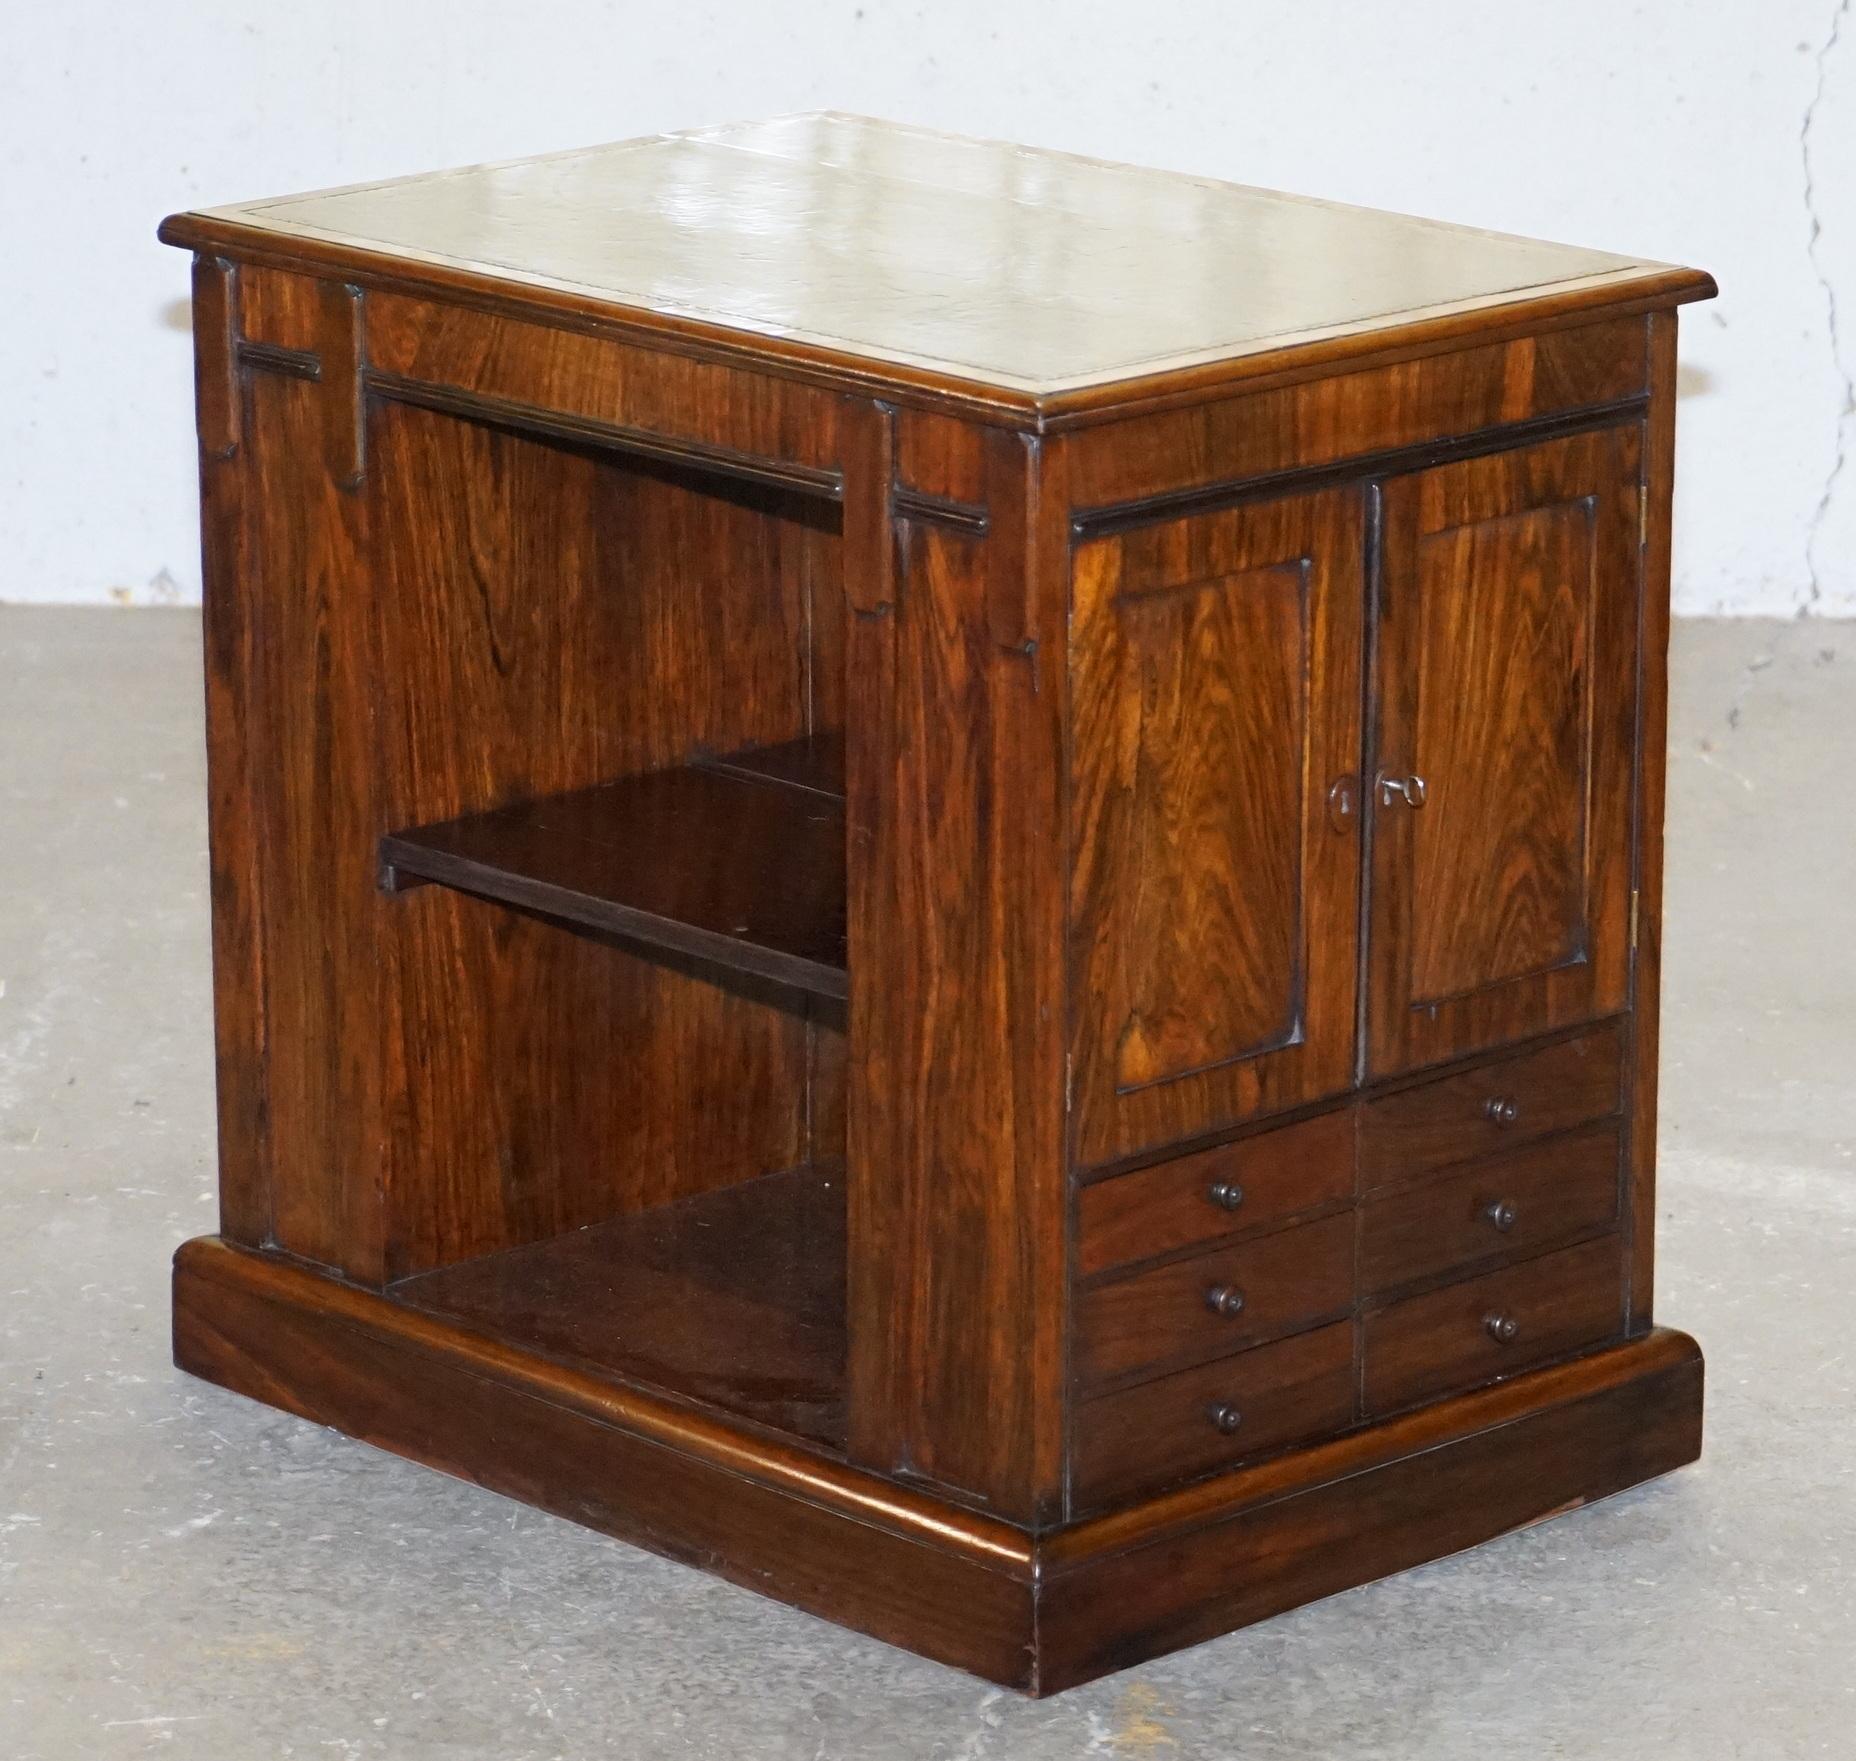 Royal House Antiques is delighted to offer for sale this absolutely sublime highly collectable, fully restored, solid hardwood William IV Library Folio cabinet with drawers and bookcase sections, finished with the original leather top circa